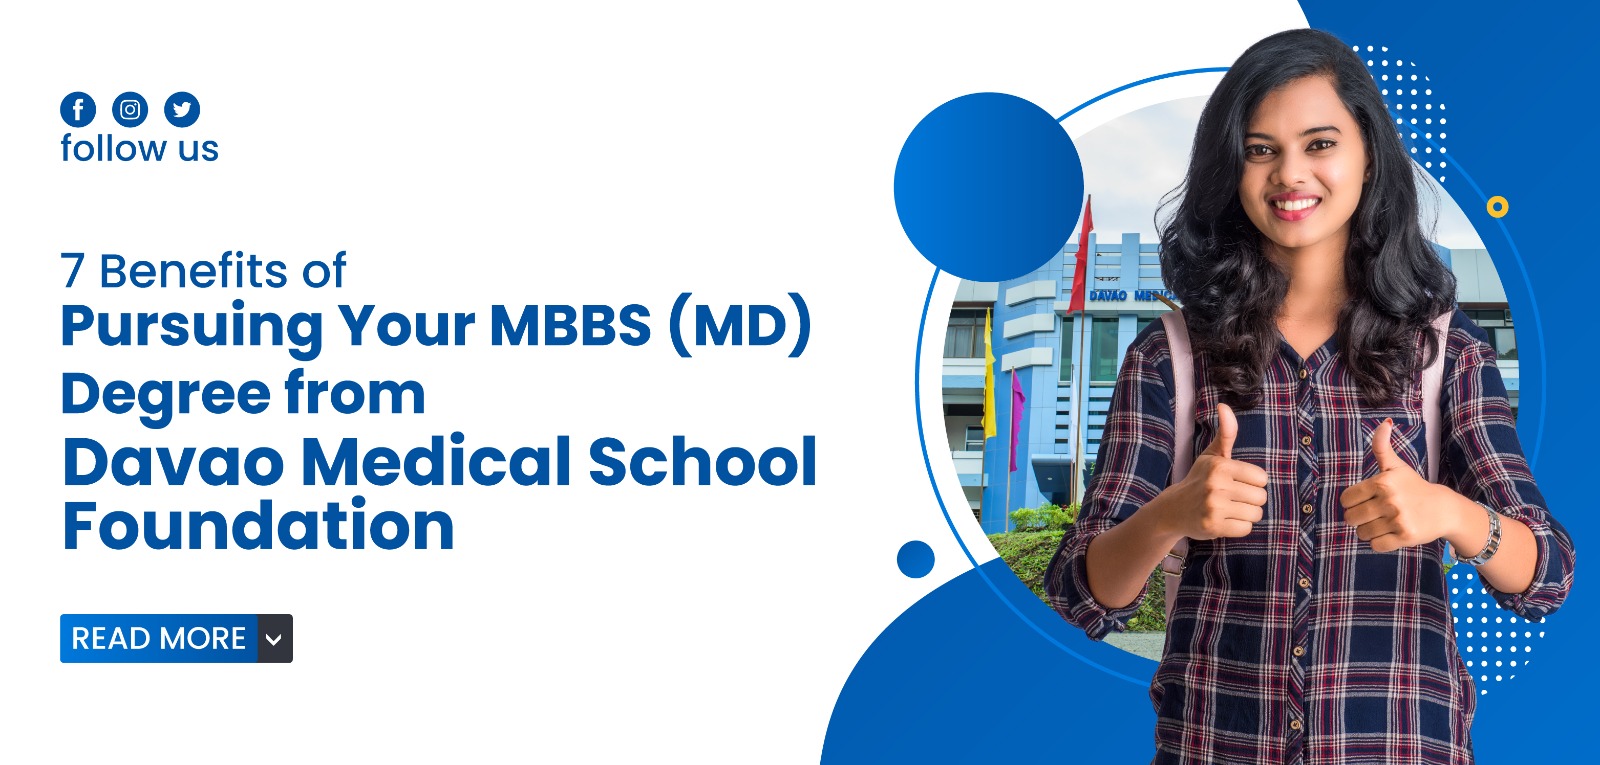 7 Benefits of Pursuing Your MBBS (MD) Degree from Davao Medical School Foundation